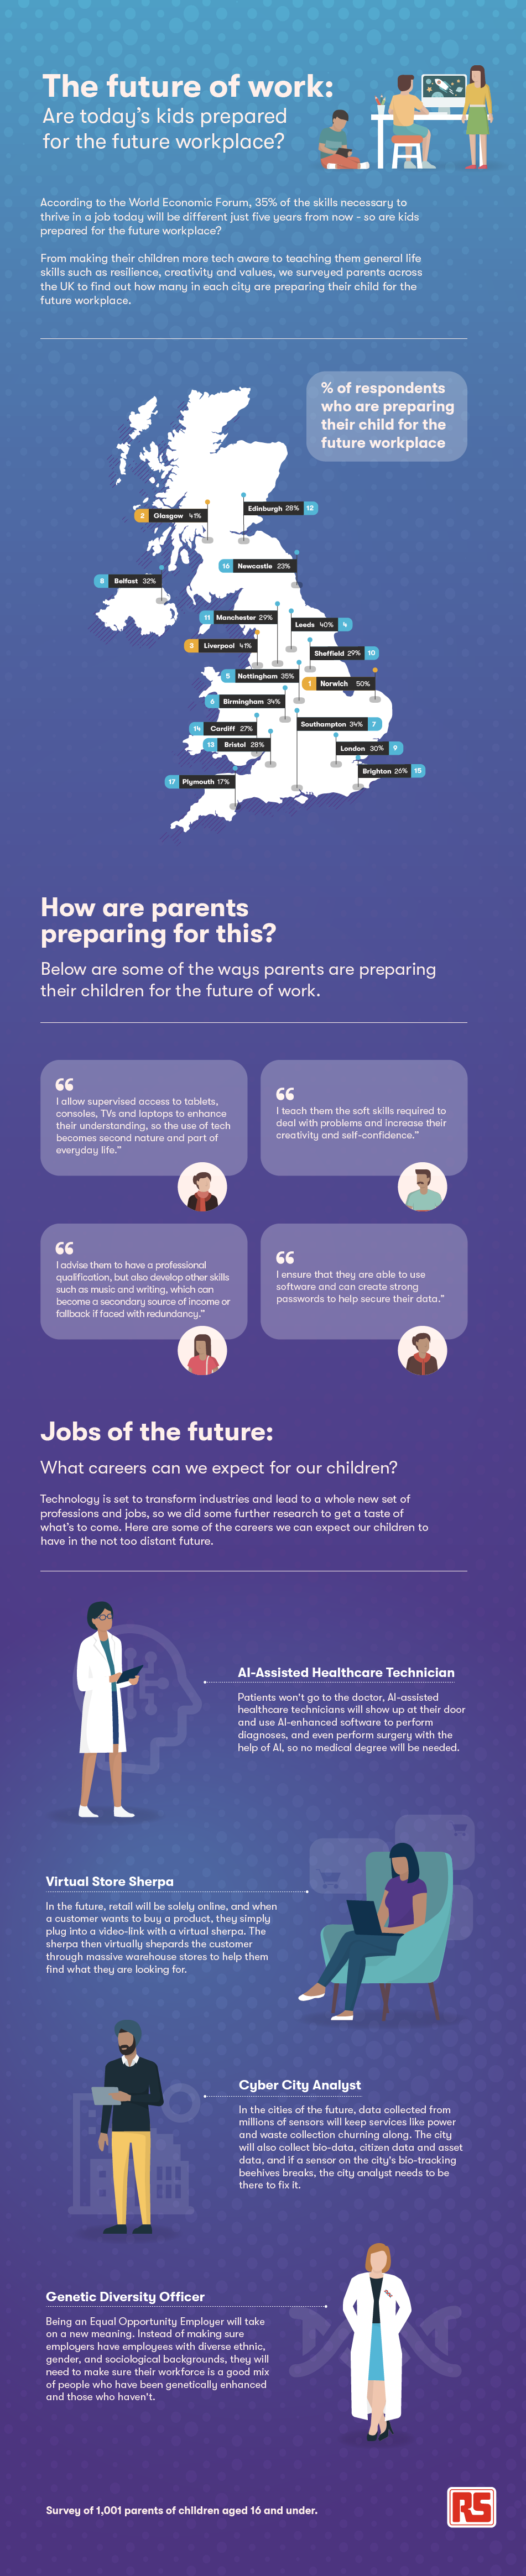 jobs of the future infographic